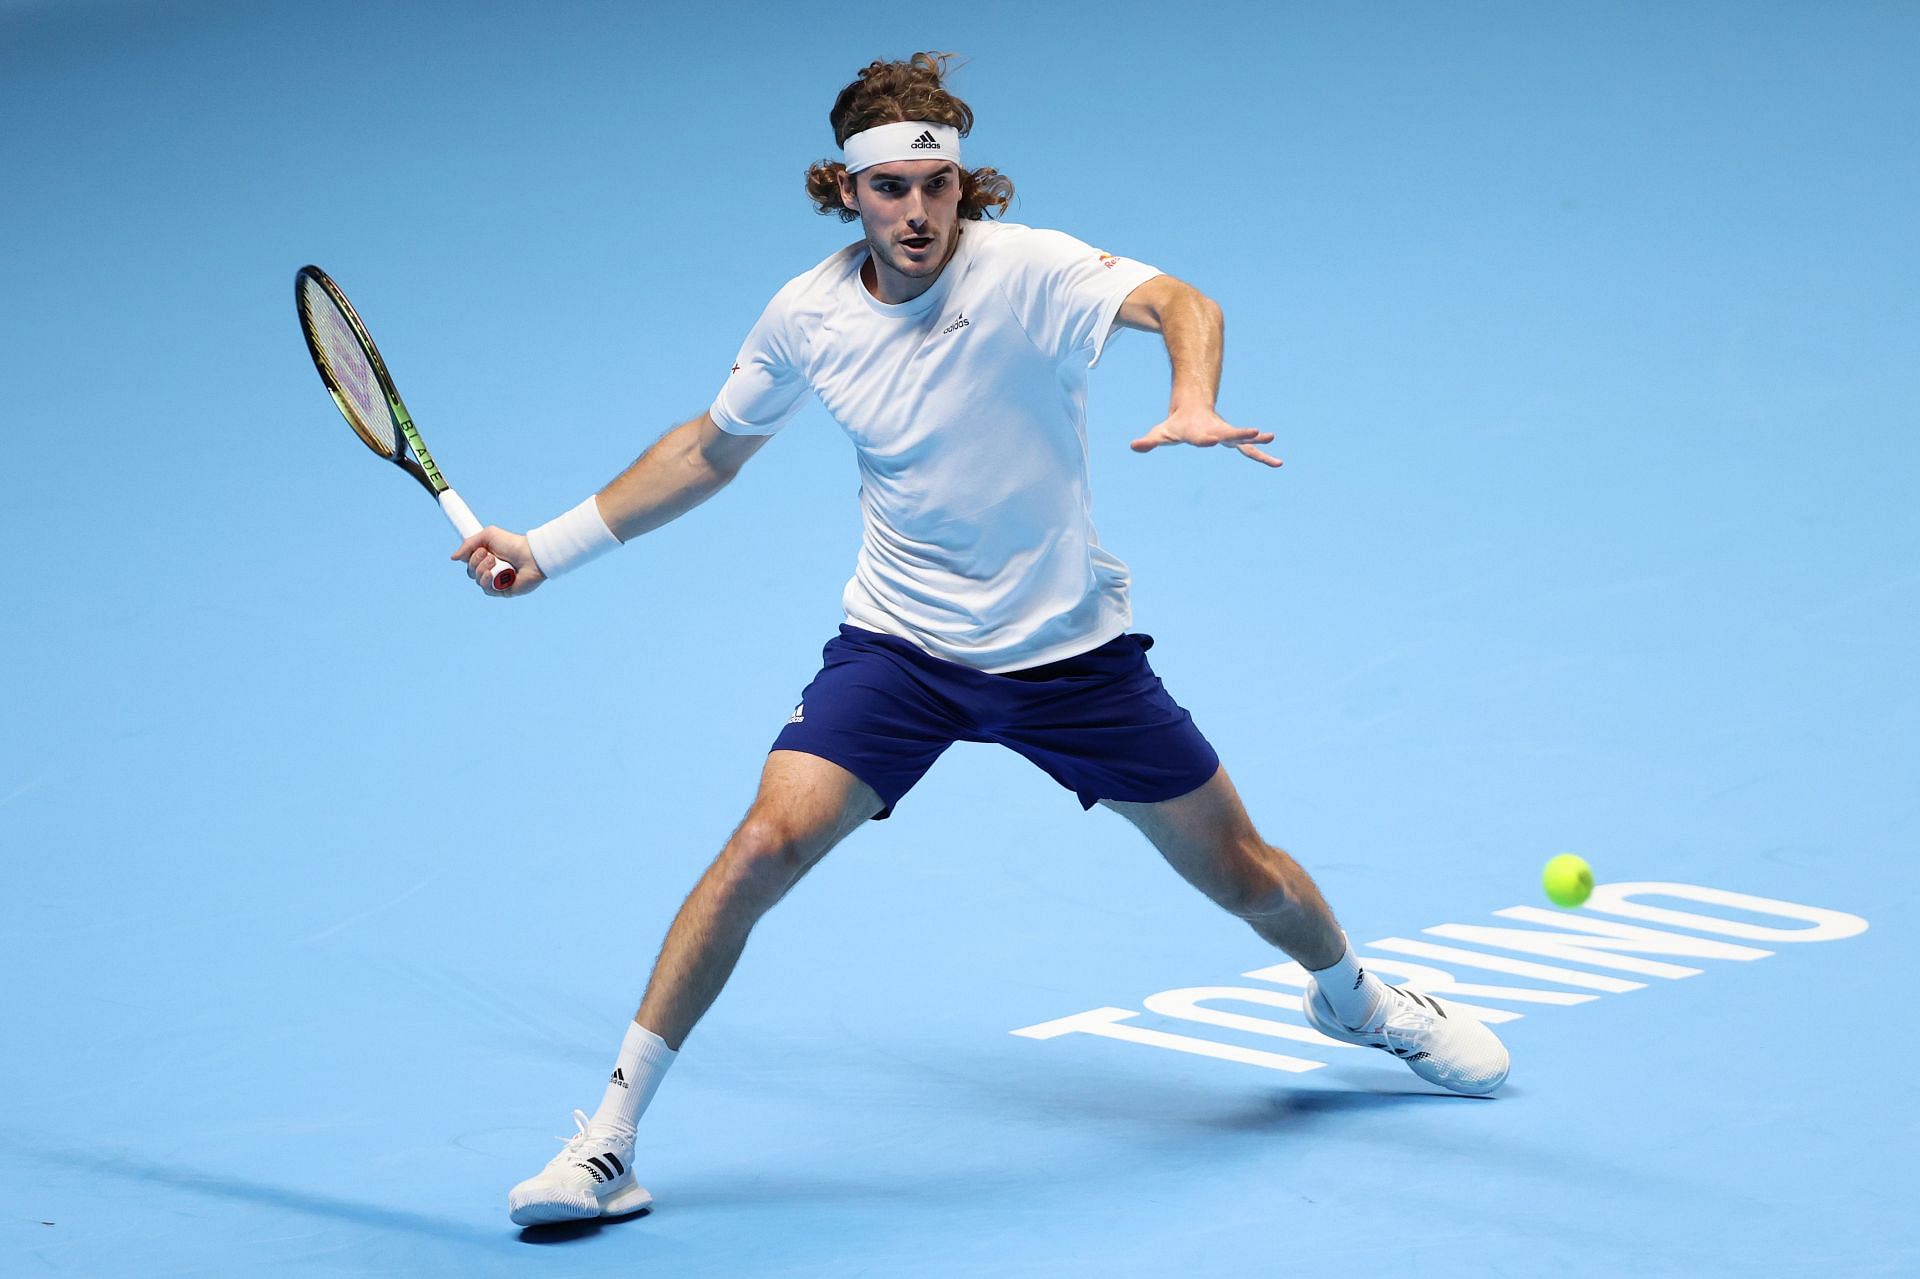 Stefanos Tsitsipas in action at the ATP Finals 2021